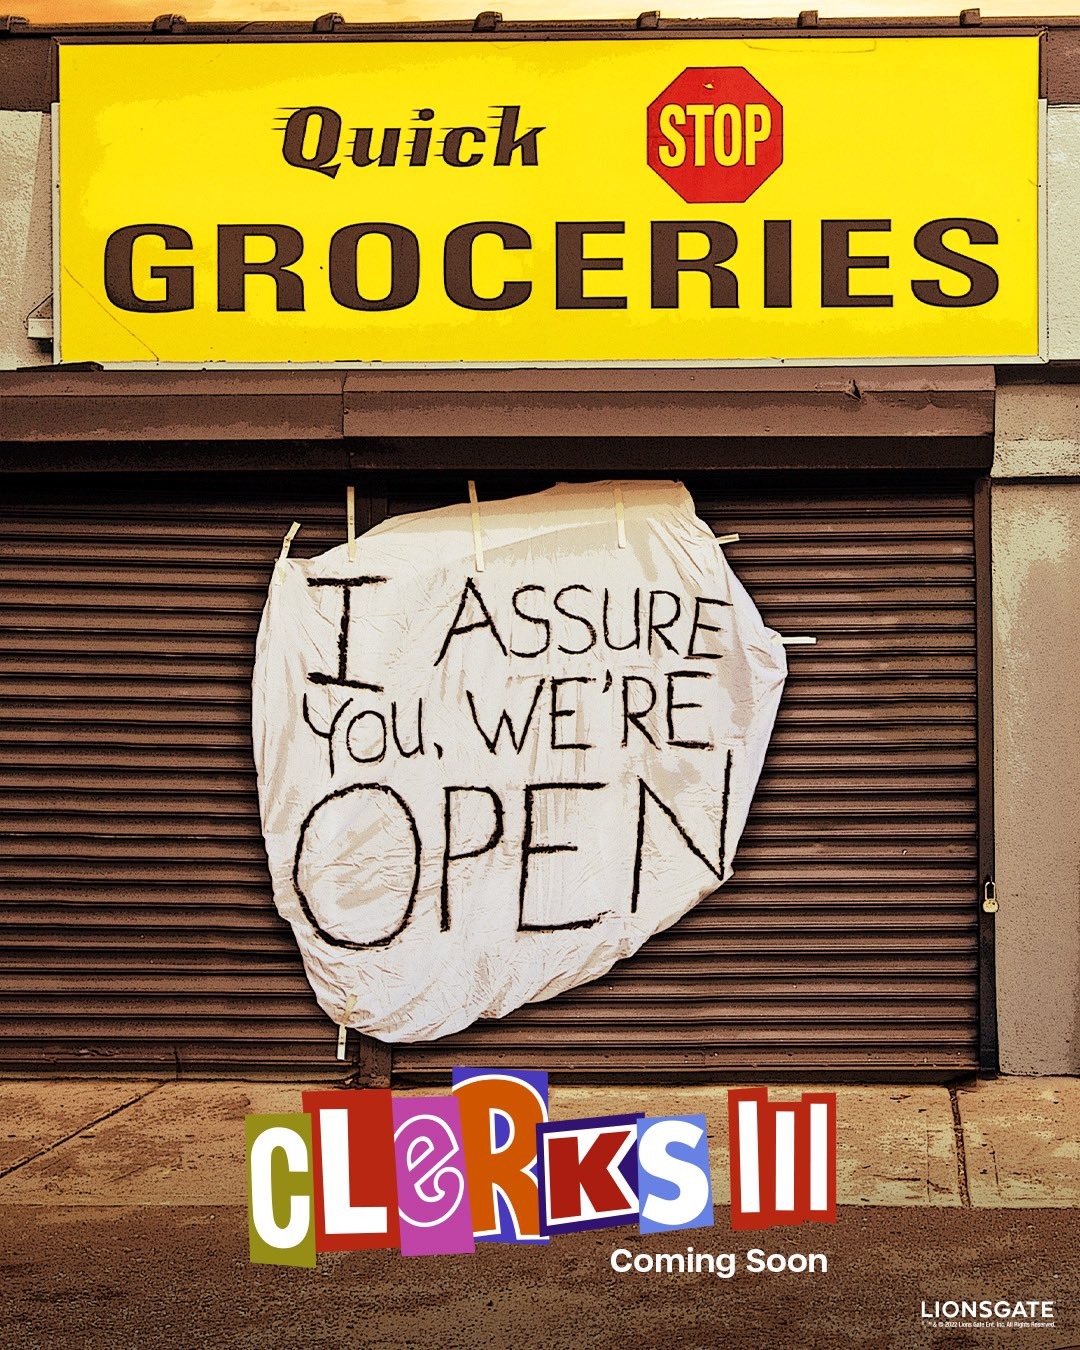 Extra Large Movie Poster Image for Clerks III (#2 of 8)